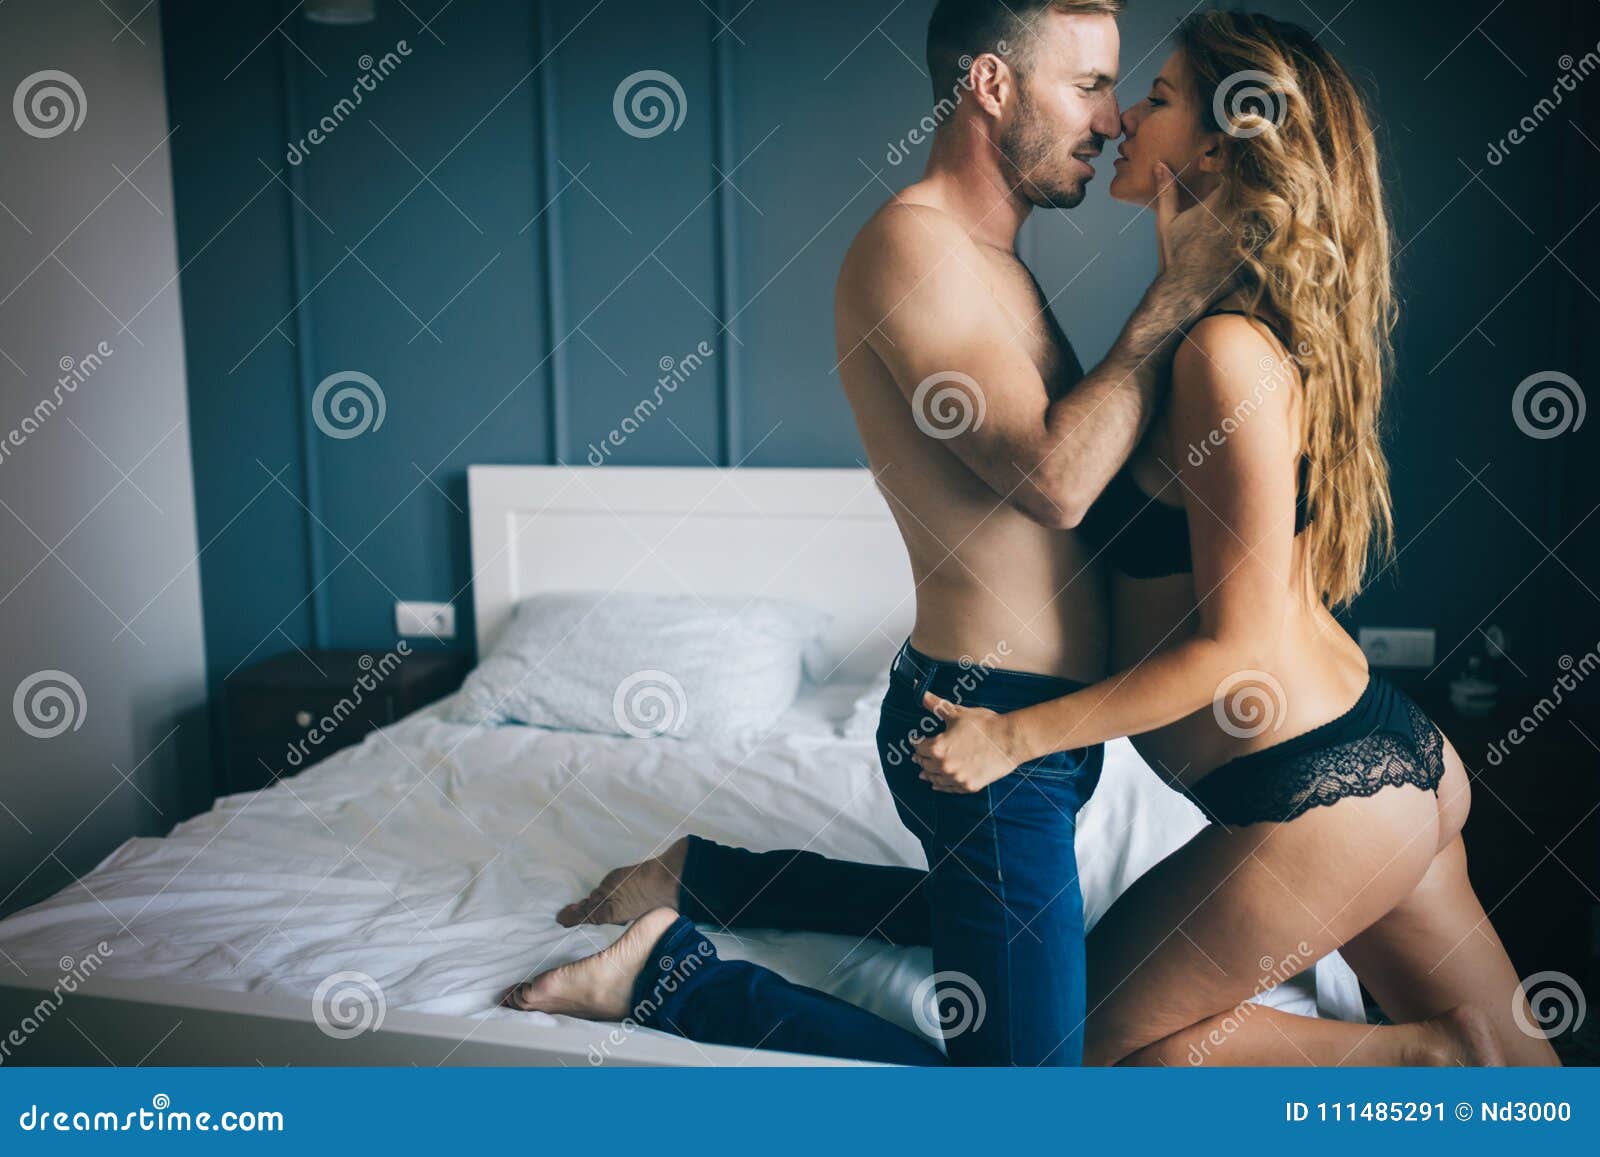 Back View of Woman in Black Panties Holding Her Bra while Man is Lying on Bed Stock Image pic pic